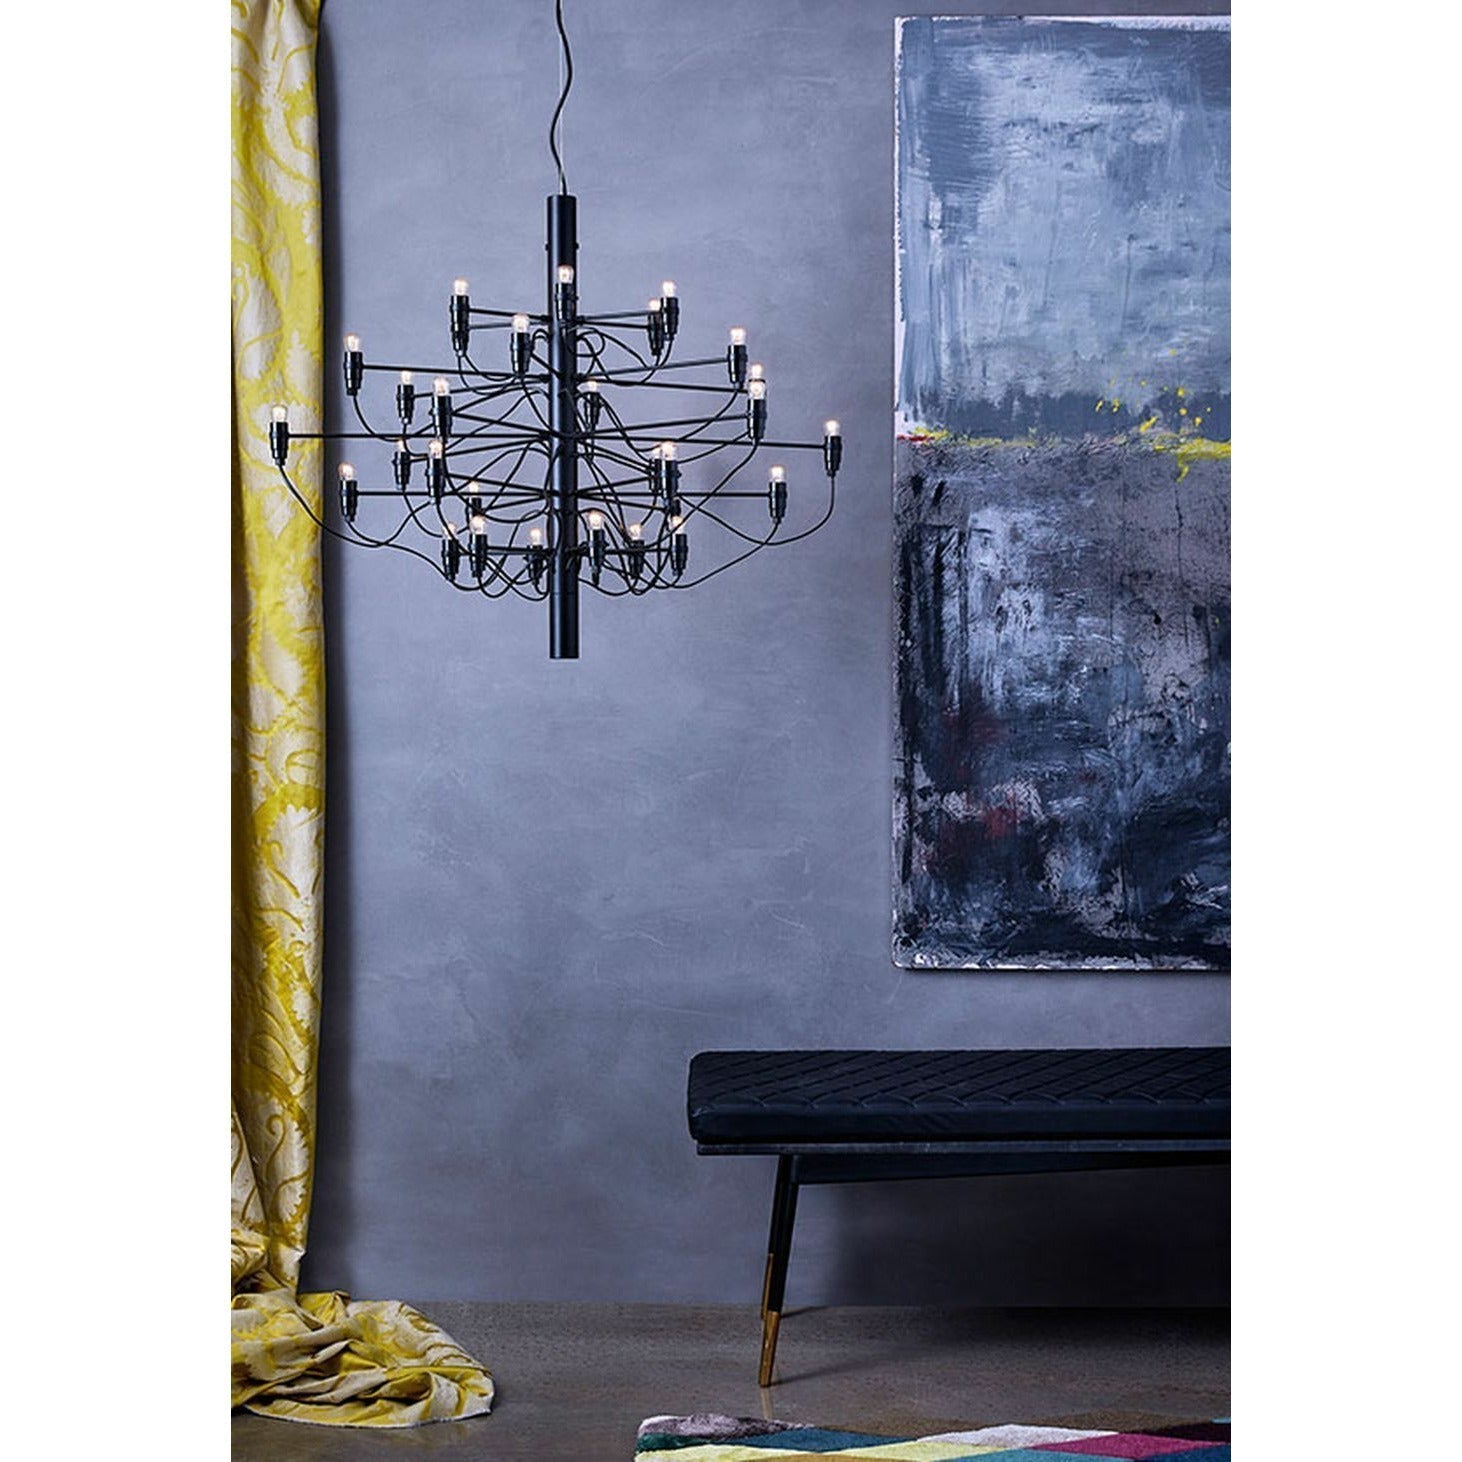 Flos 2097/50 Frosted Chandelier, eir